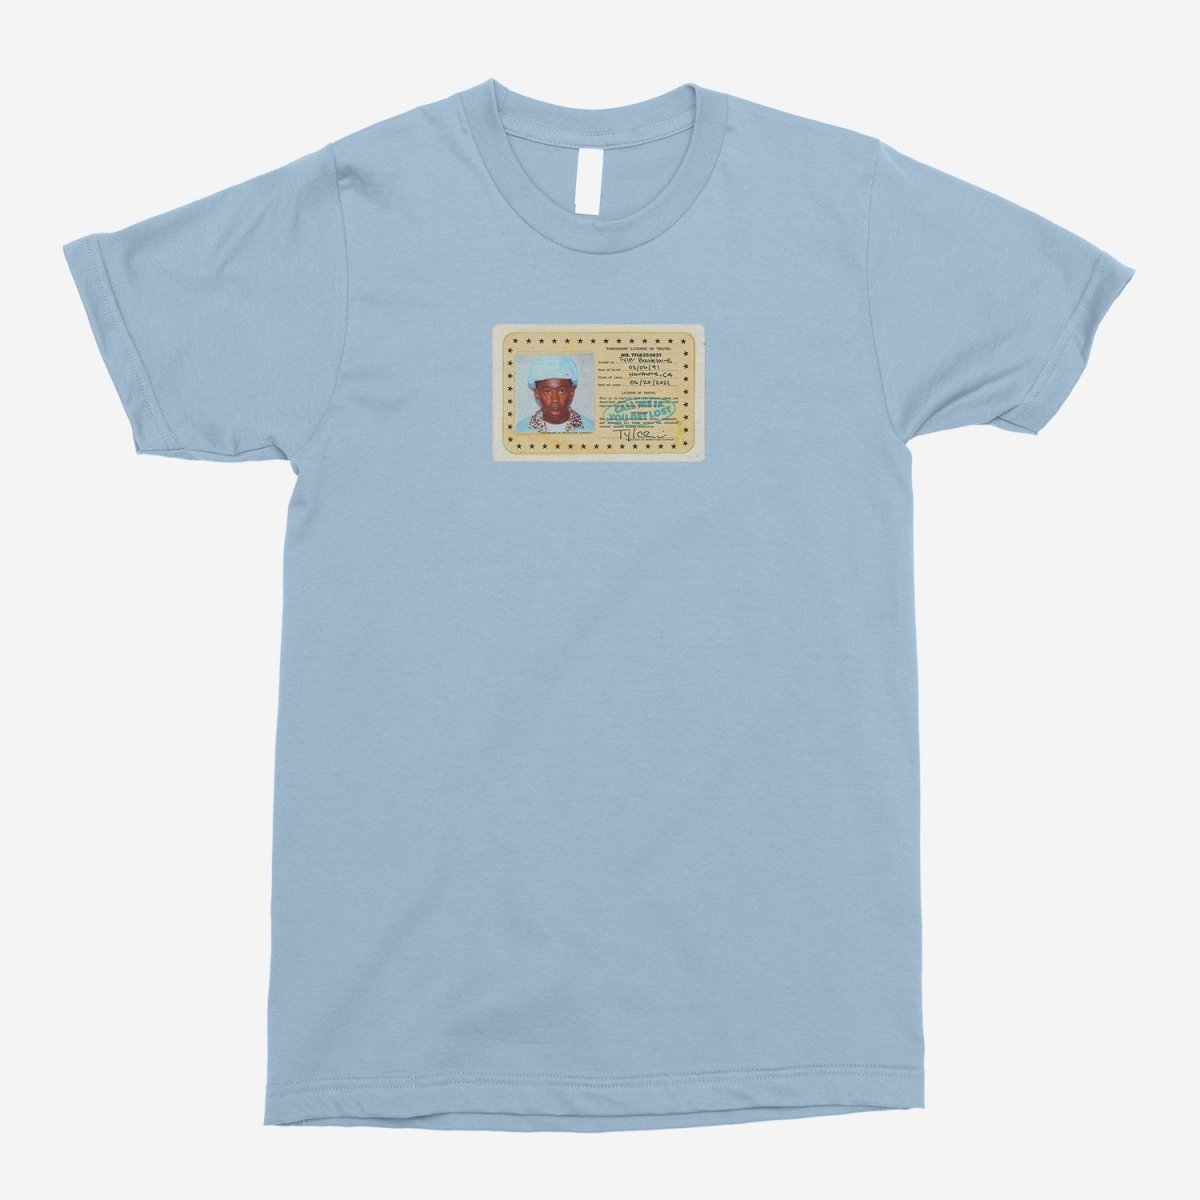 Tyler, The Creator - Call Me If You Get Lost (ID Card) Unisex T-Shirt